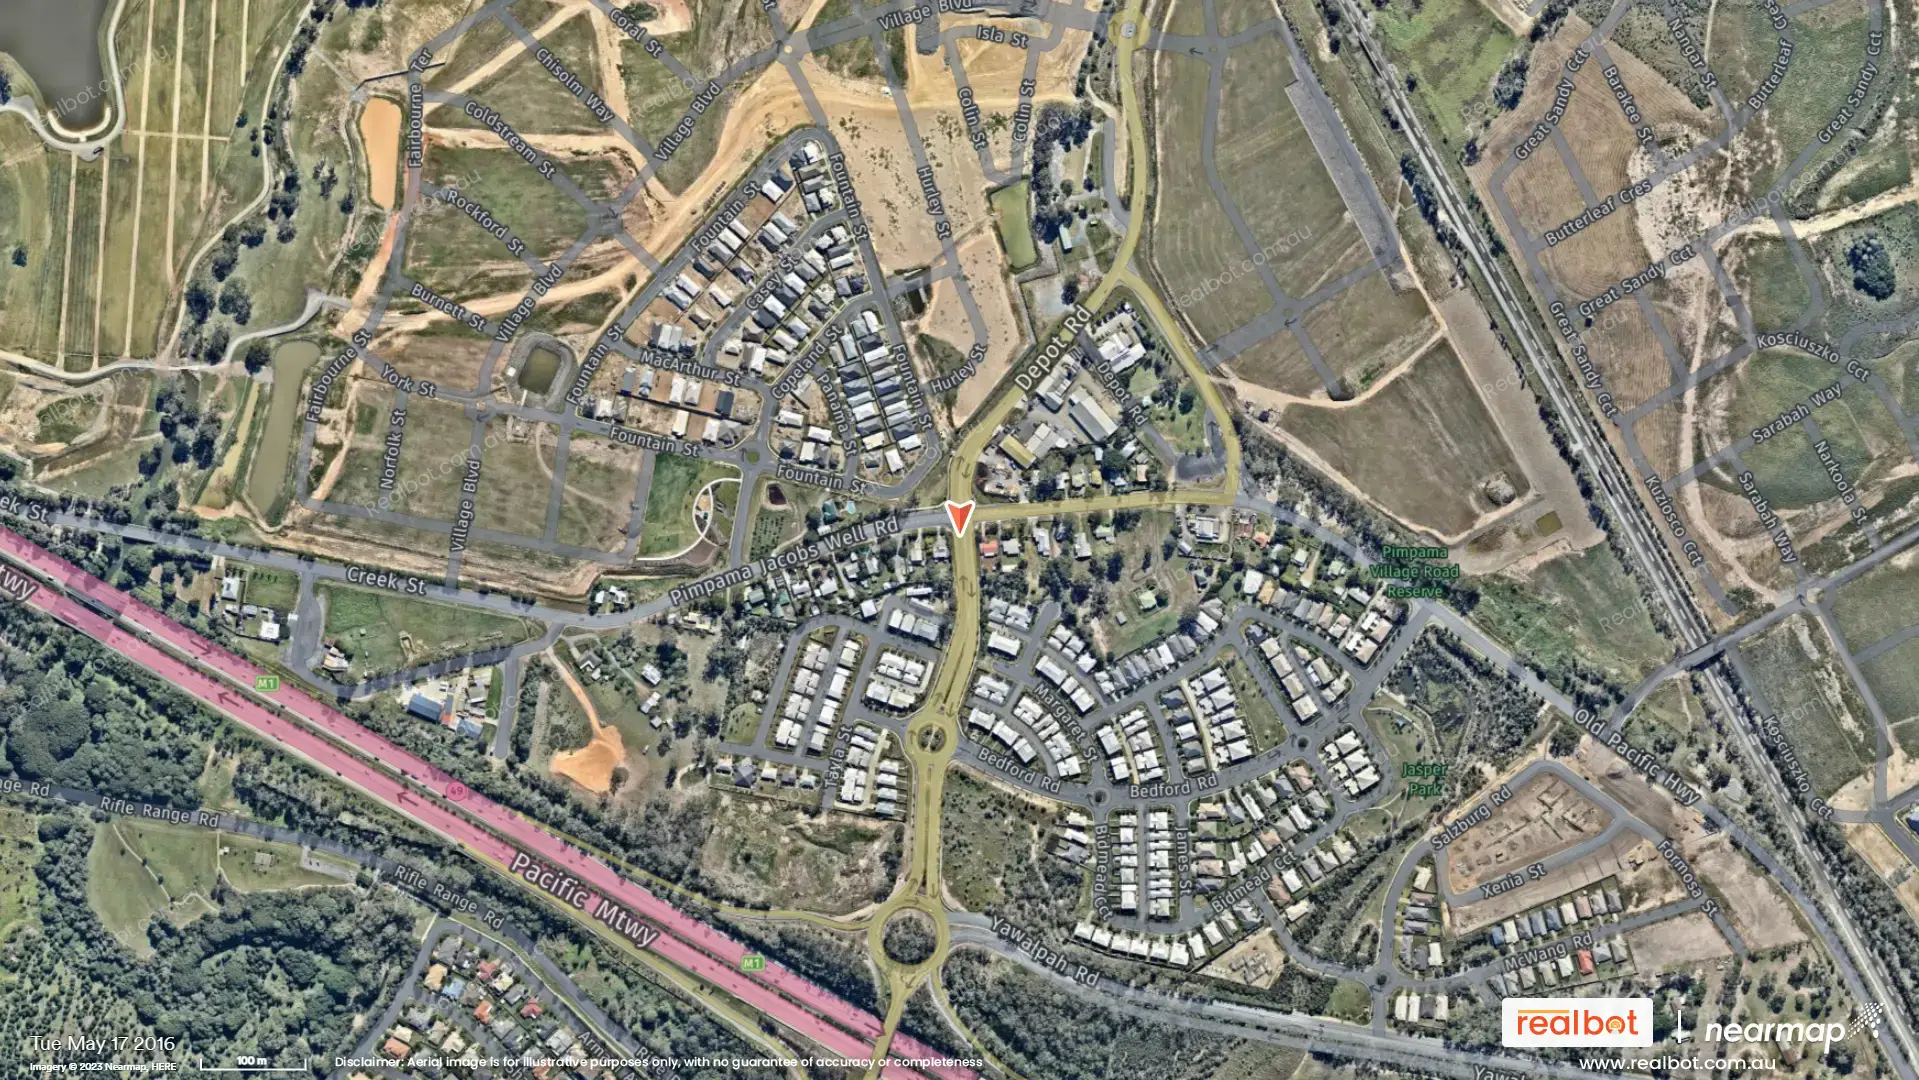 pimpama-qld-4209-Suburb-Profile-And-Aerial-Images-Real-Search